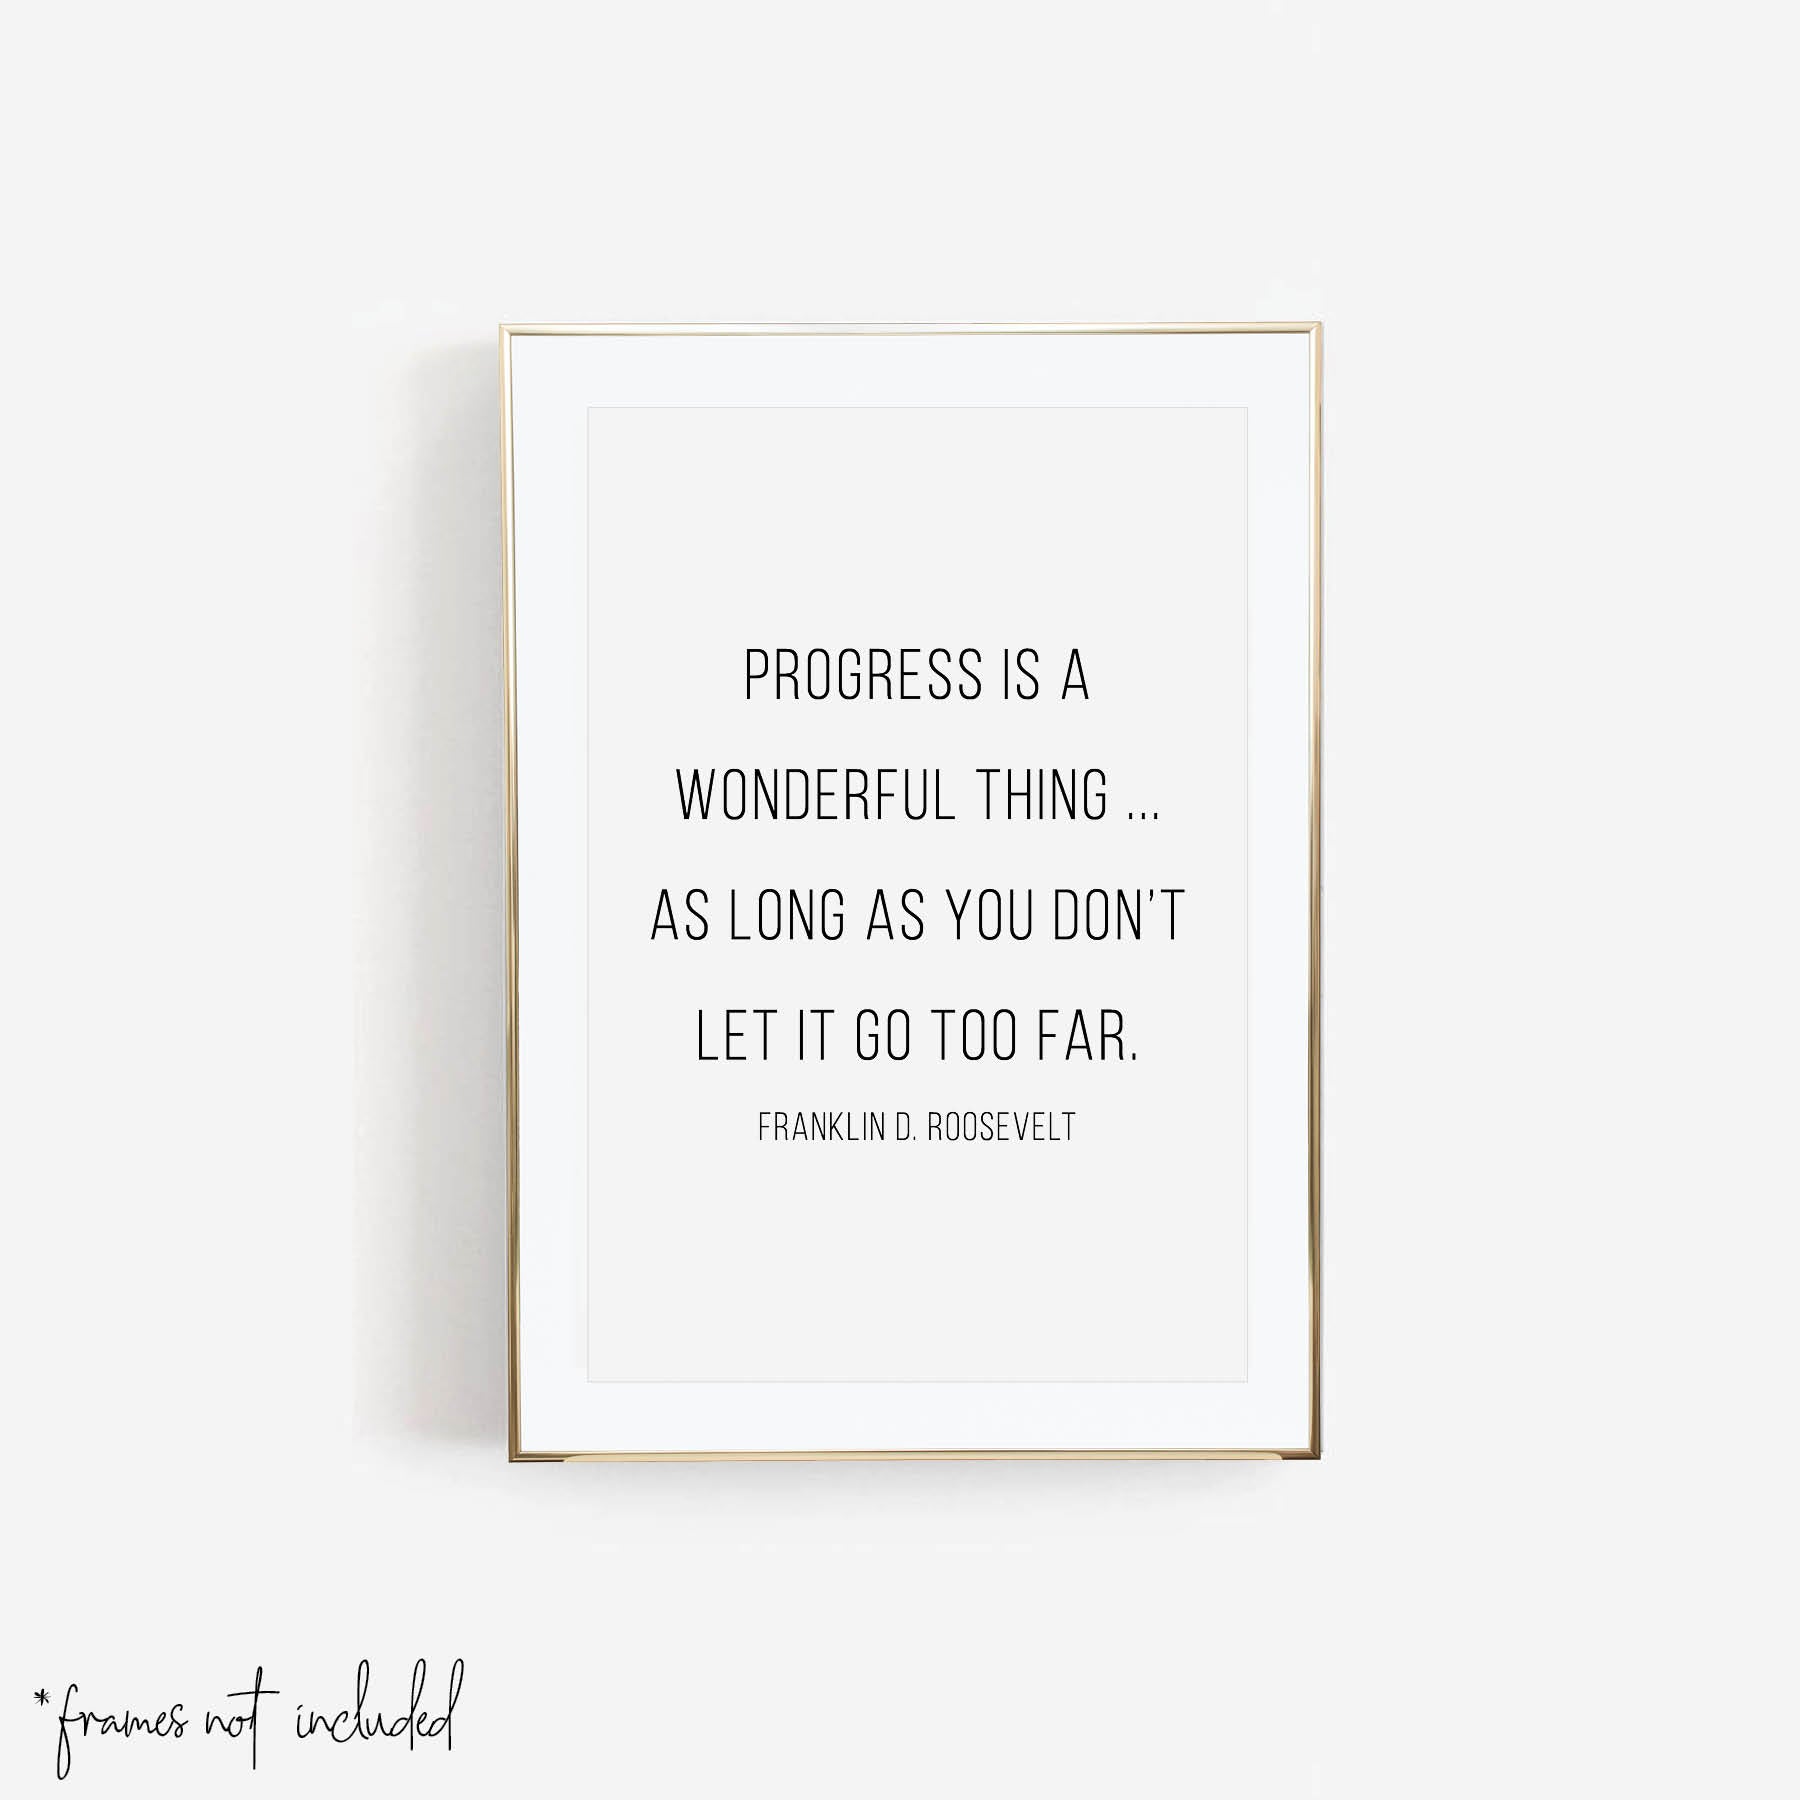 Progress Is A Wonderful Thing  As Long As You Don't Let It Go Too